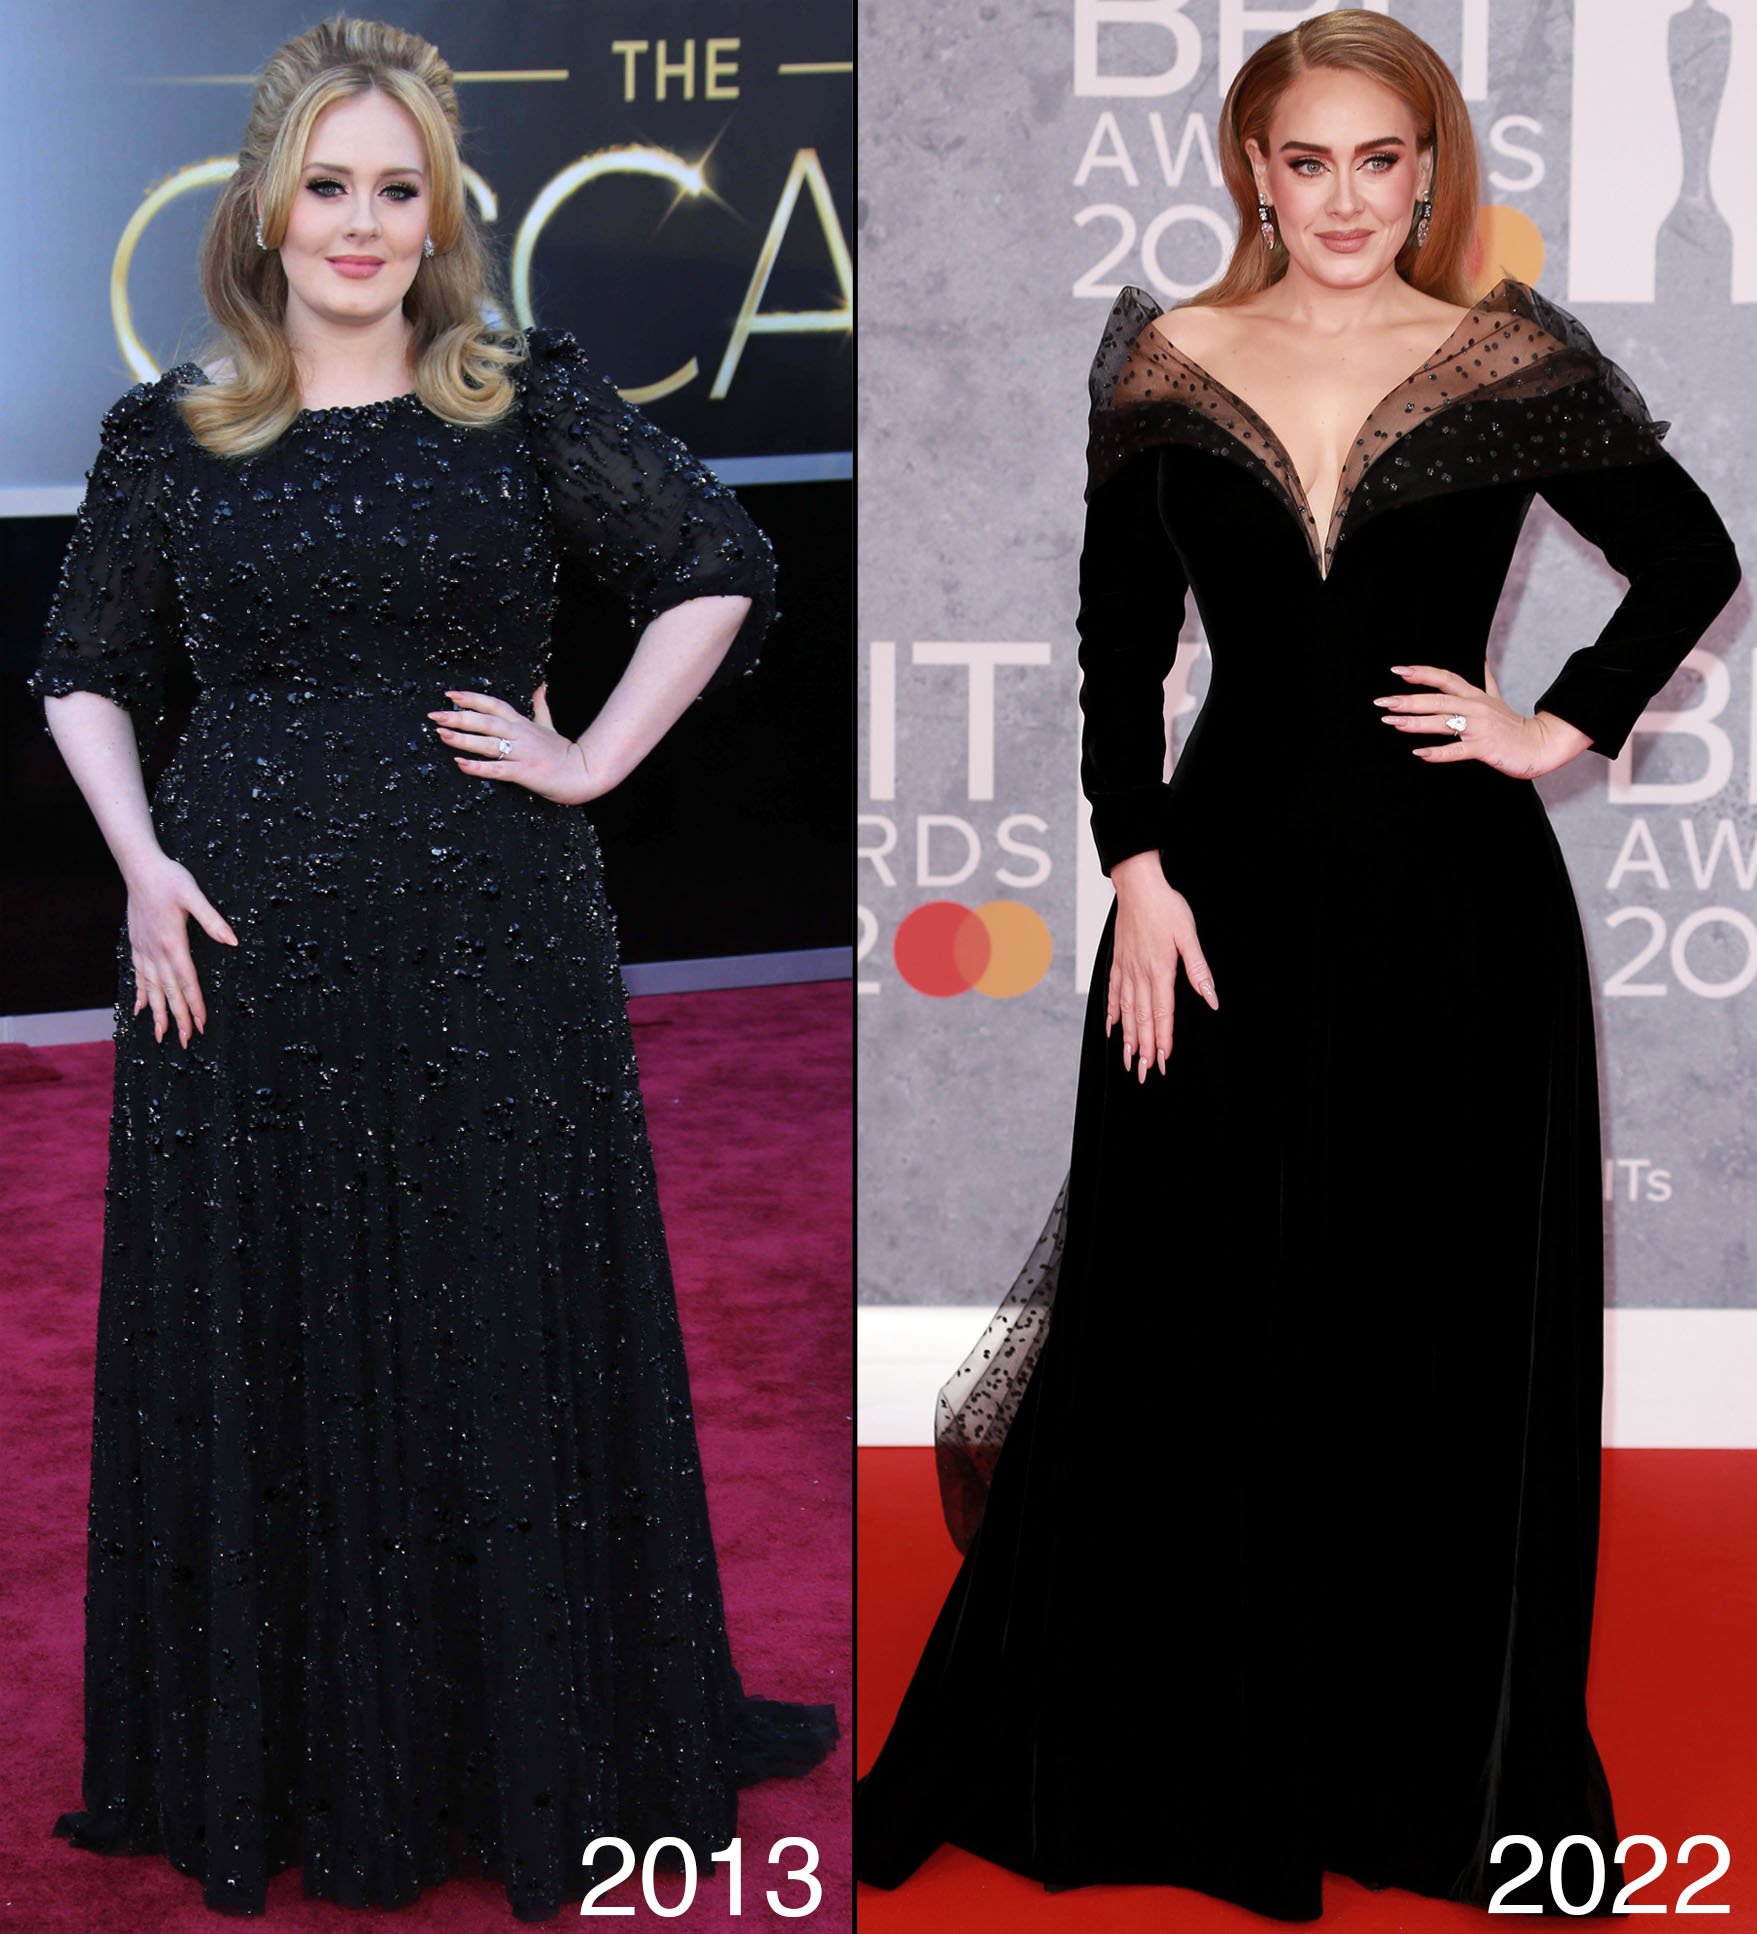 Adele lost over 100 pounds by lifting weights and doing circuit training